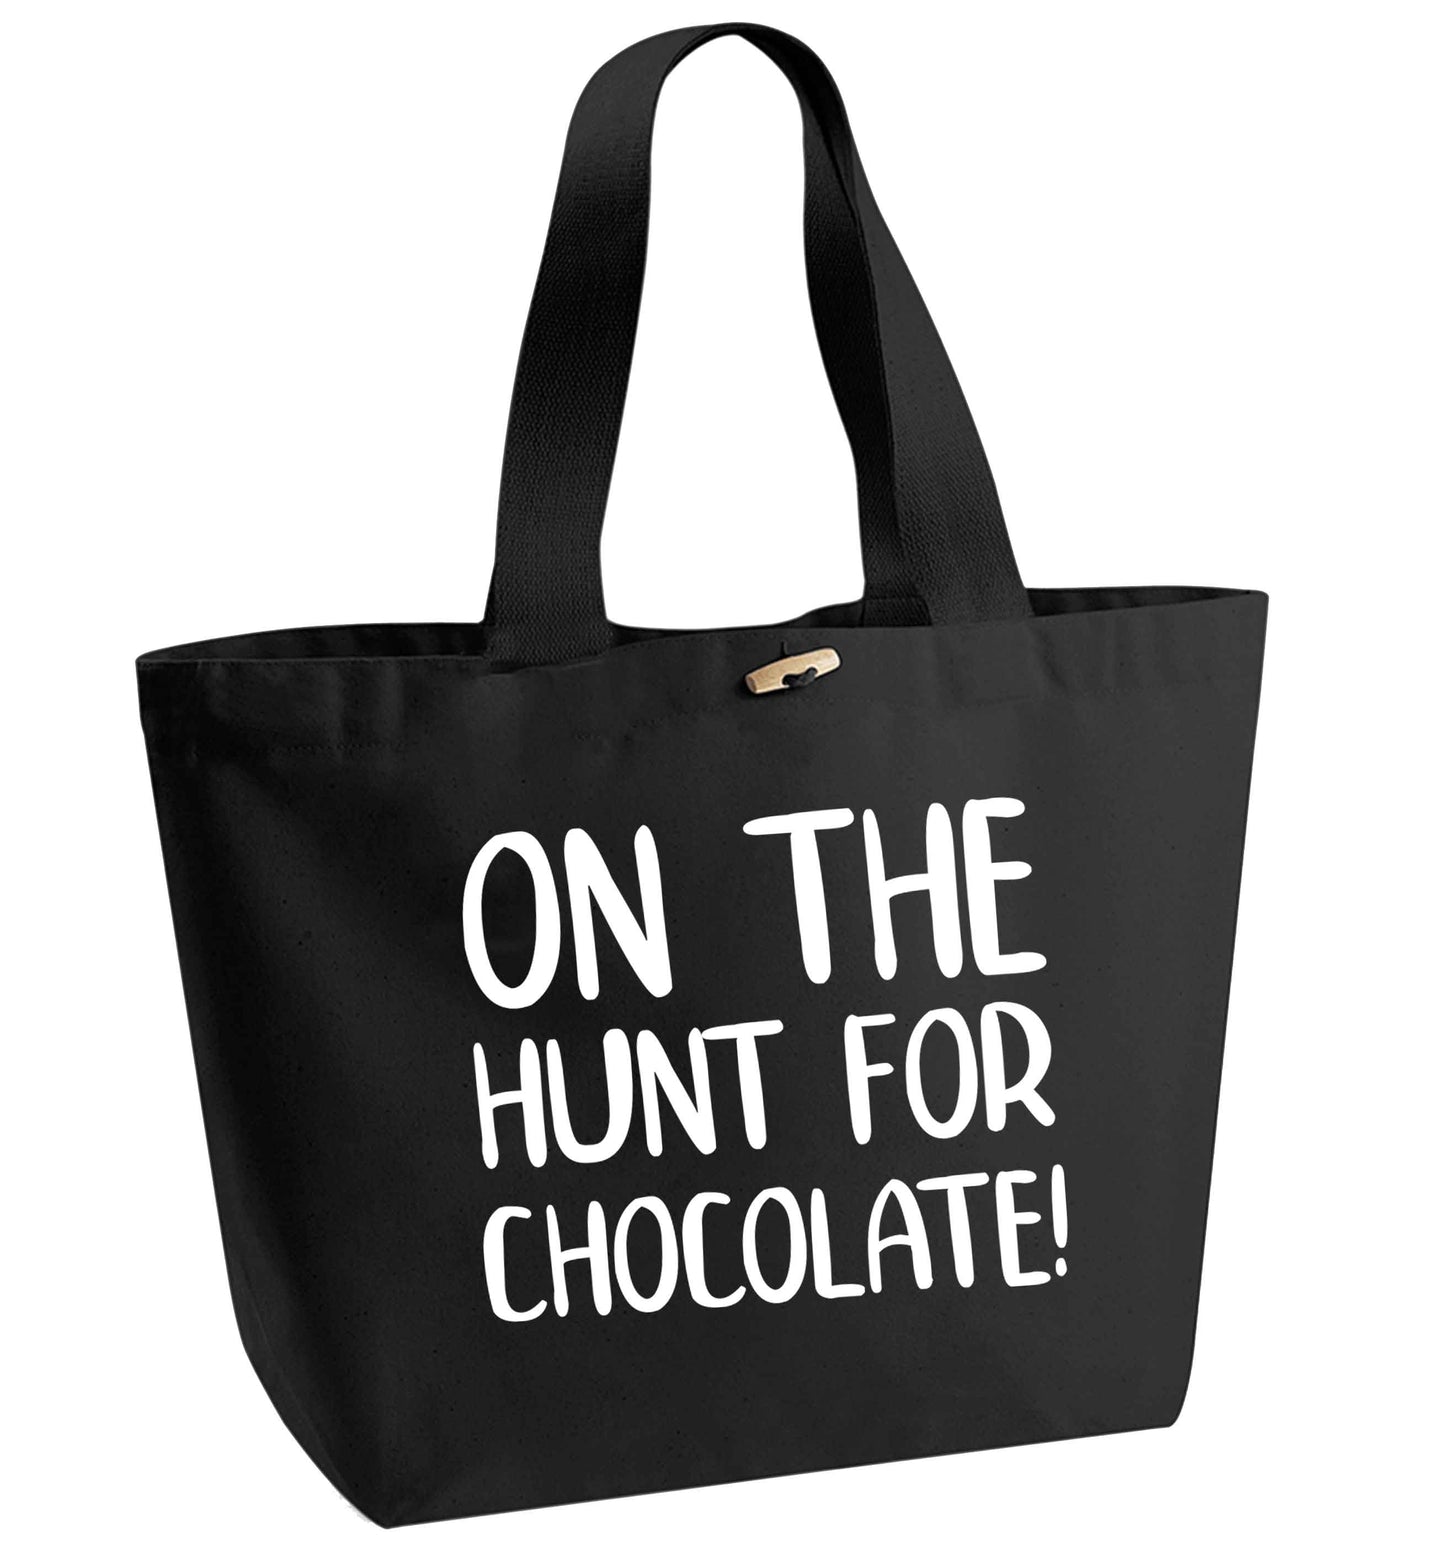 On the hunt for chocolate! organic cotton premium tote bag with wooden toggle in black